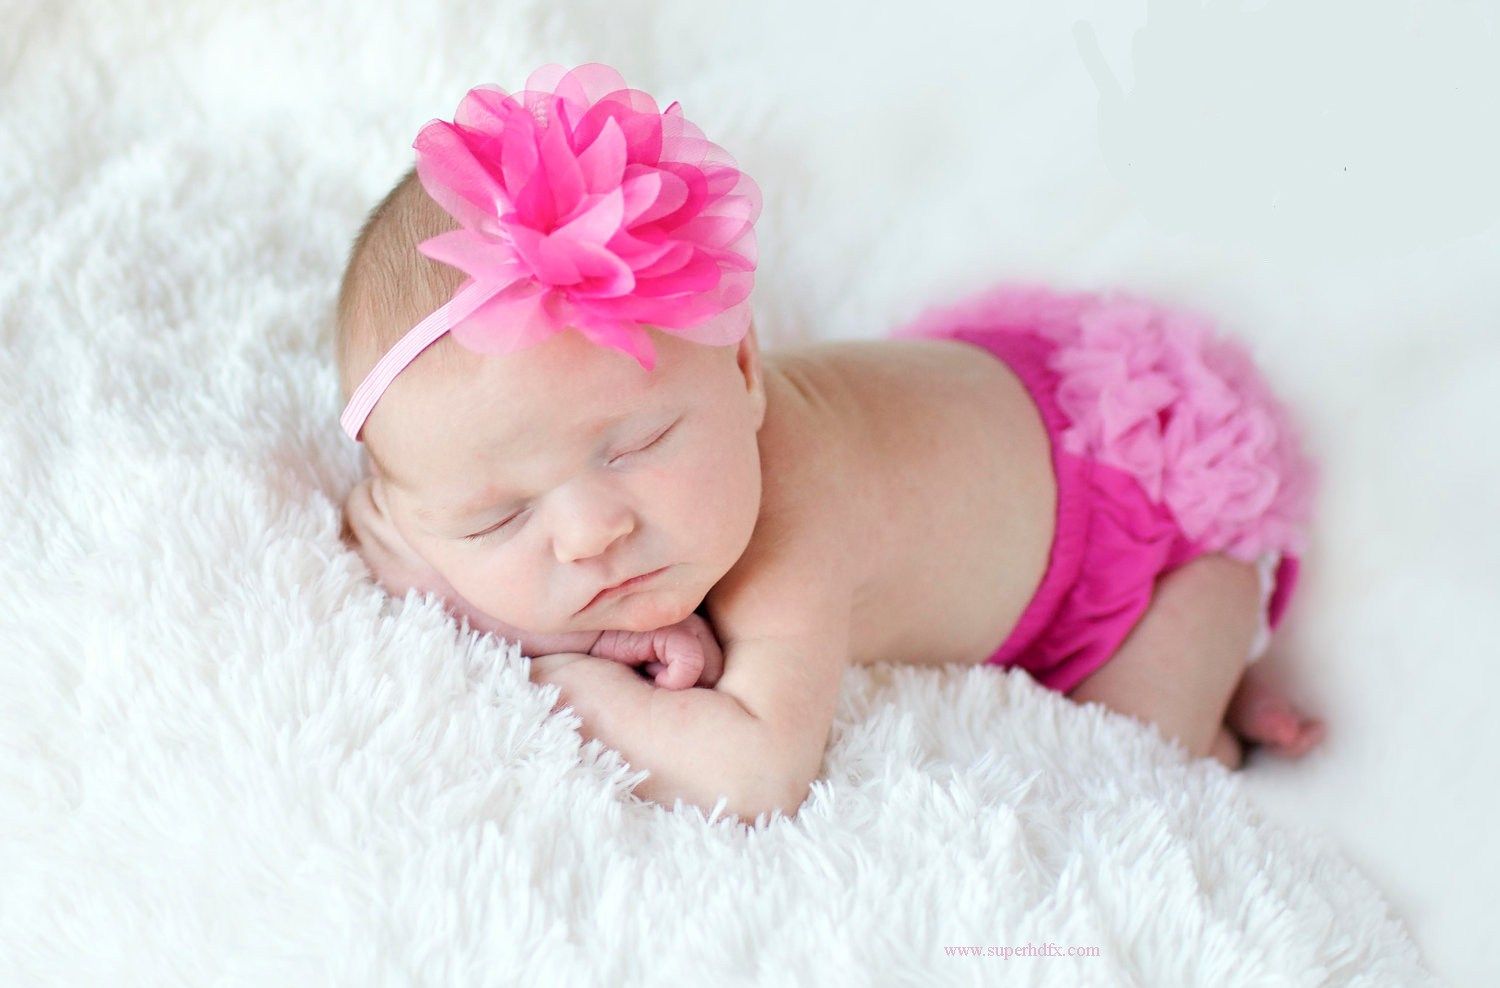 Lovely Small Baby Photo HD. High Definition Wallpaper